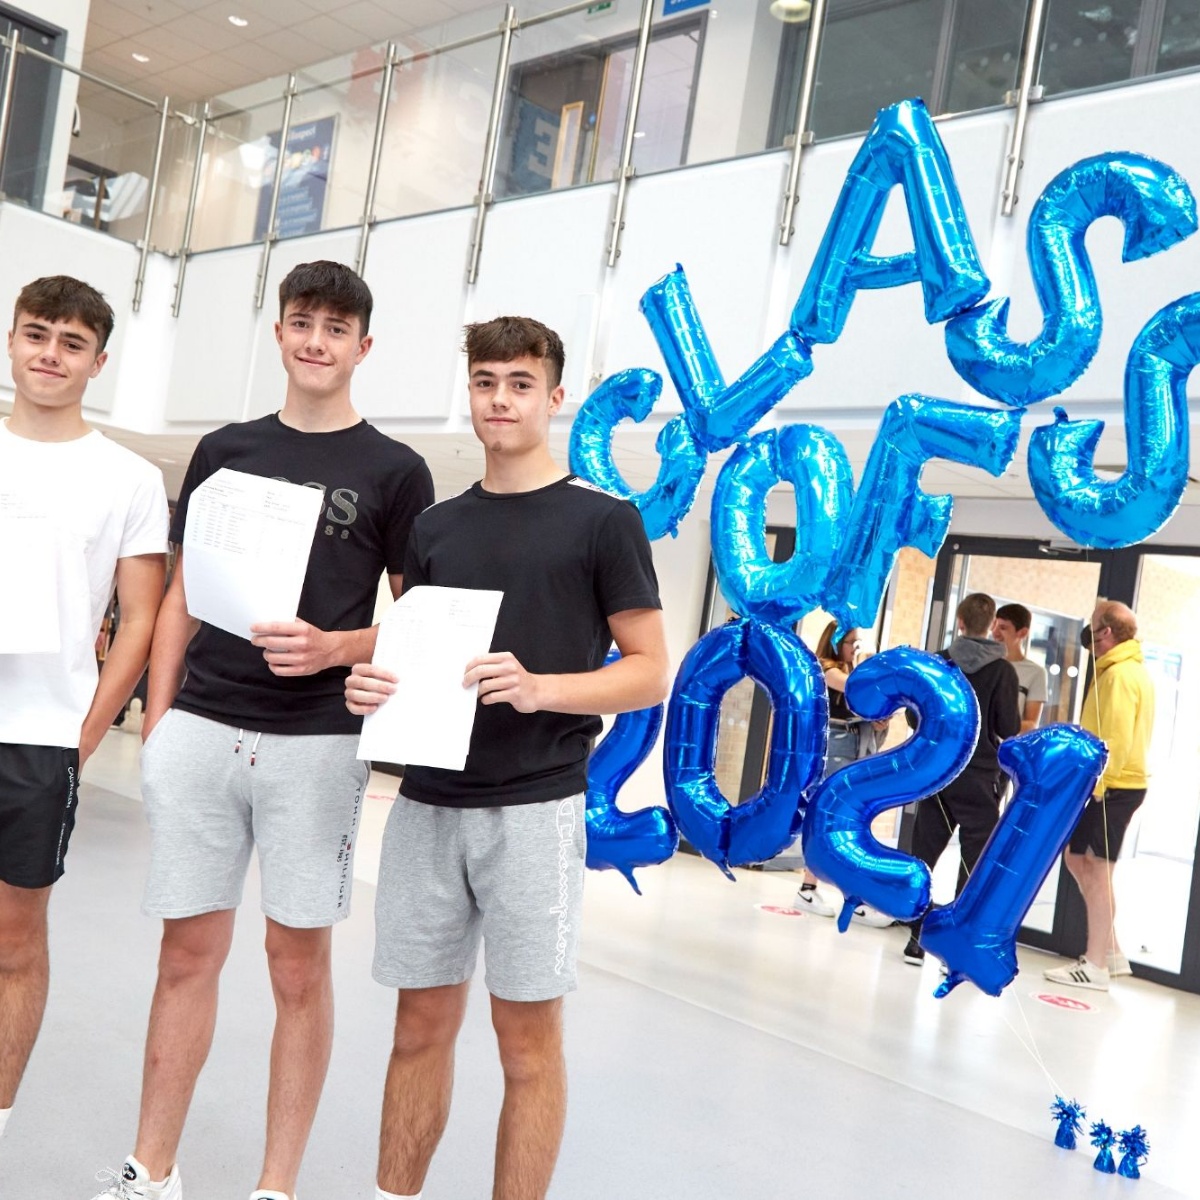 GCSE Results Day 2021 - Wolfreton School and Sixth Form College